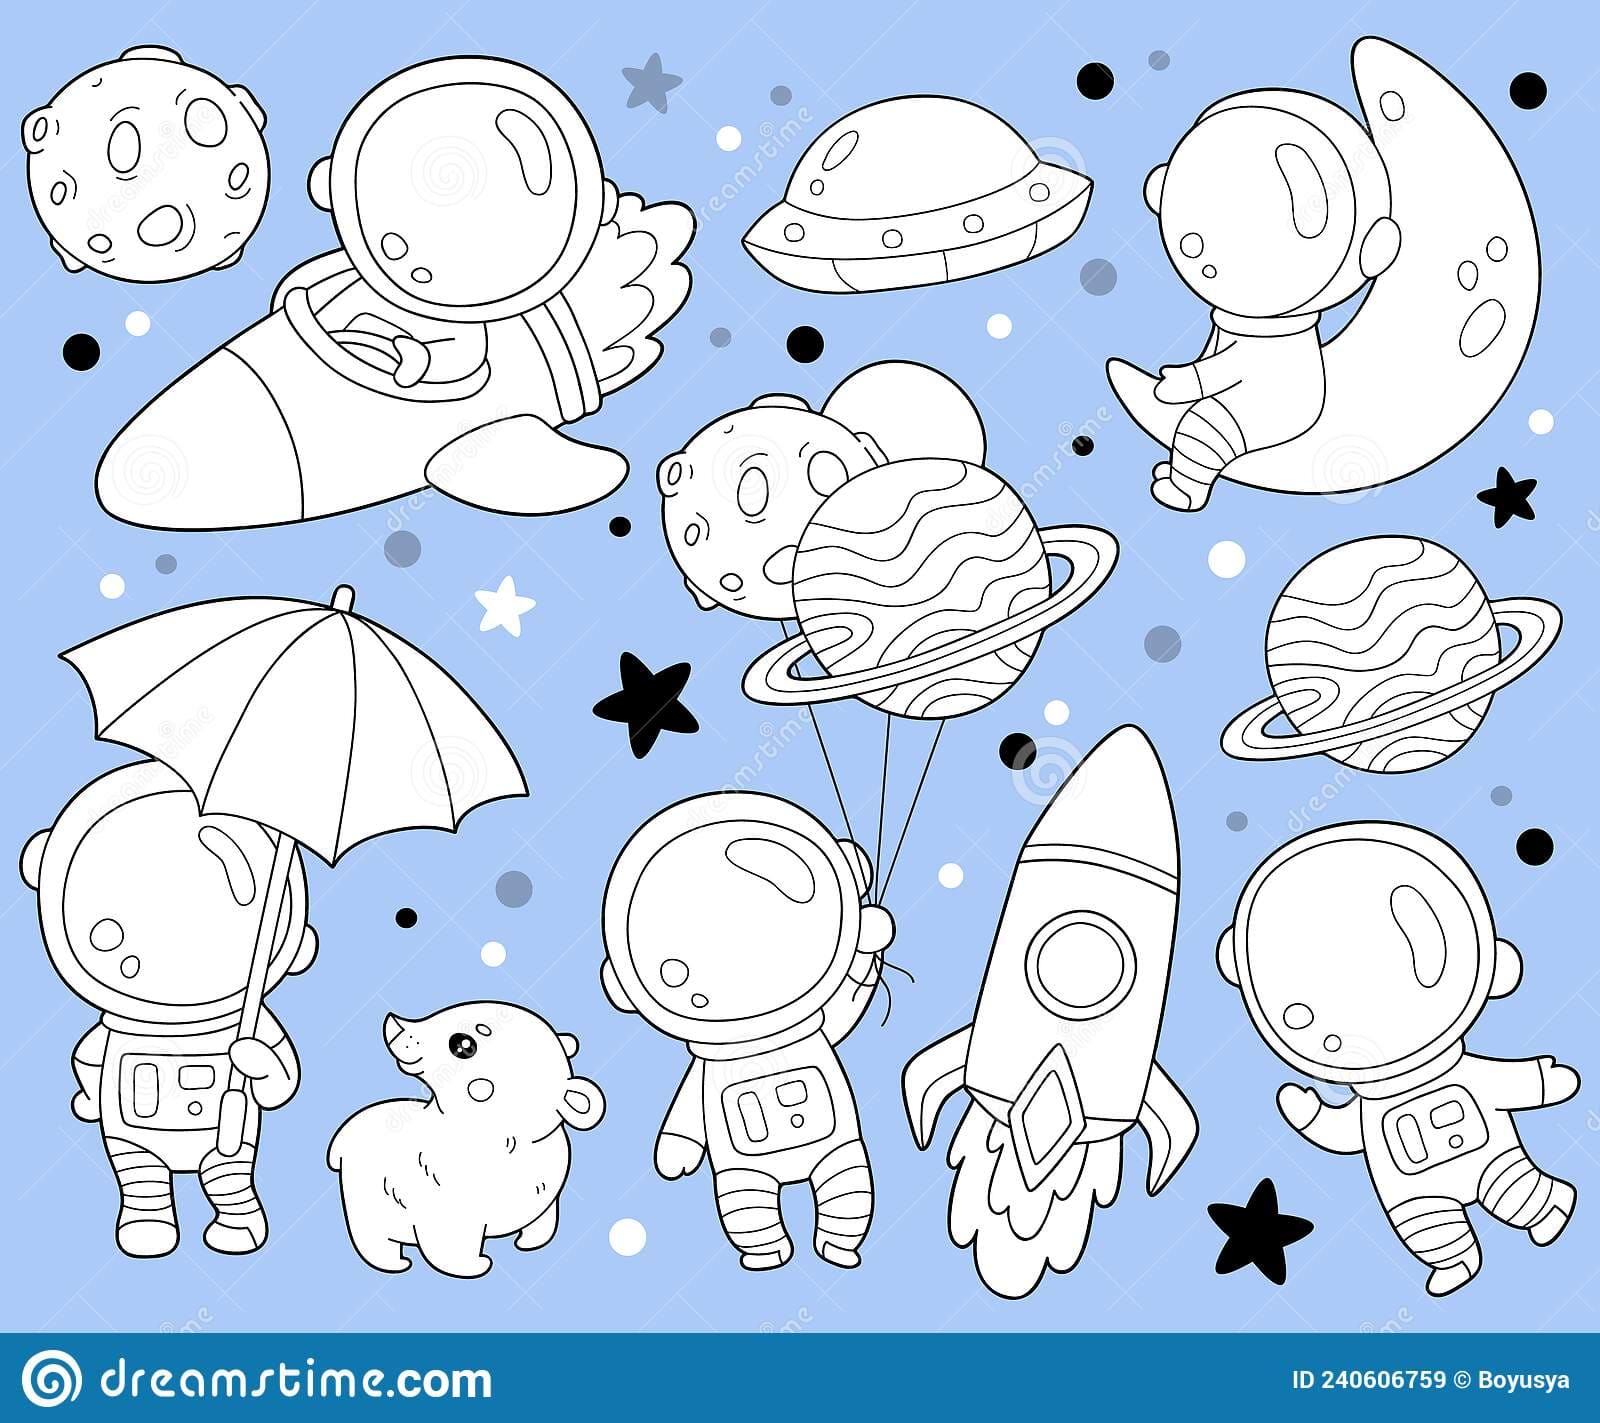 Coloring page with cartoon astronaut collection